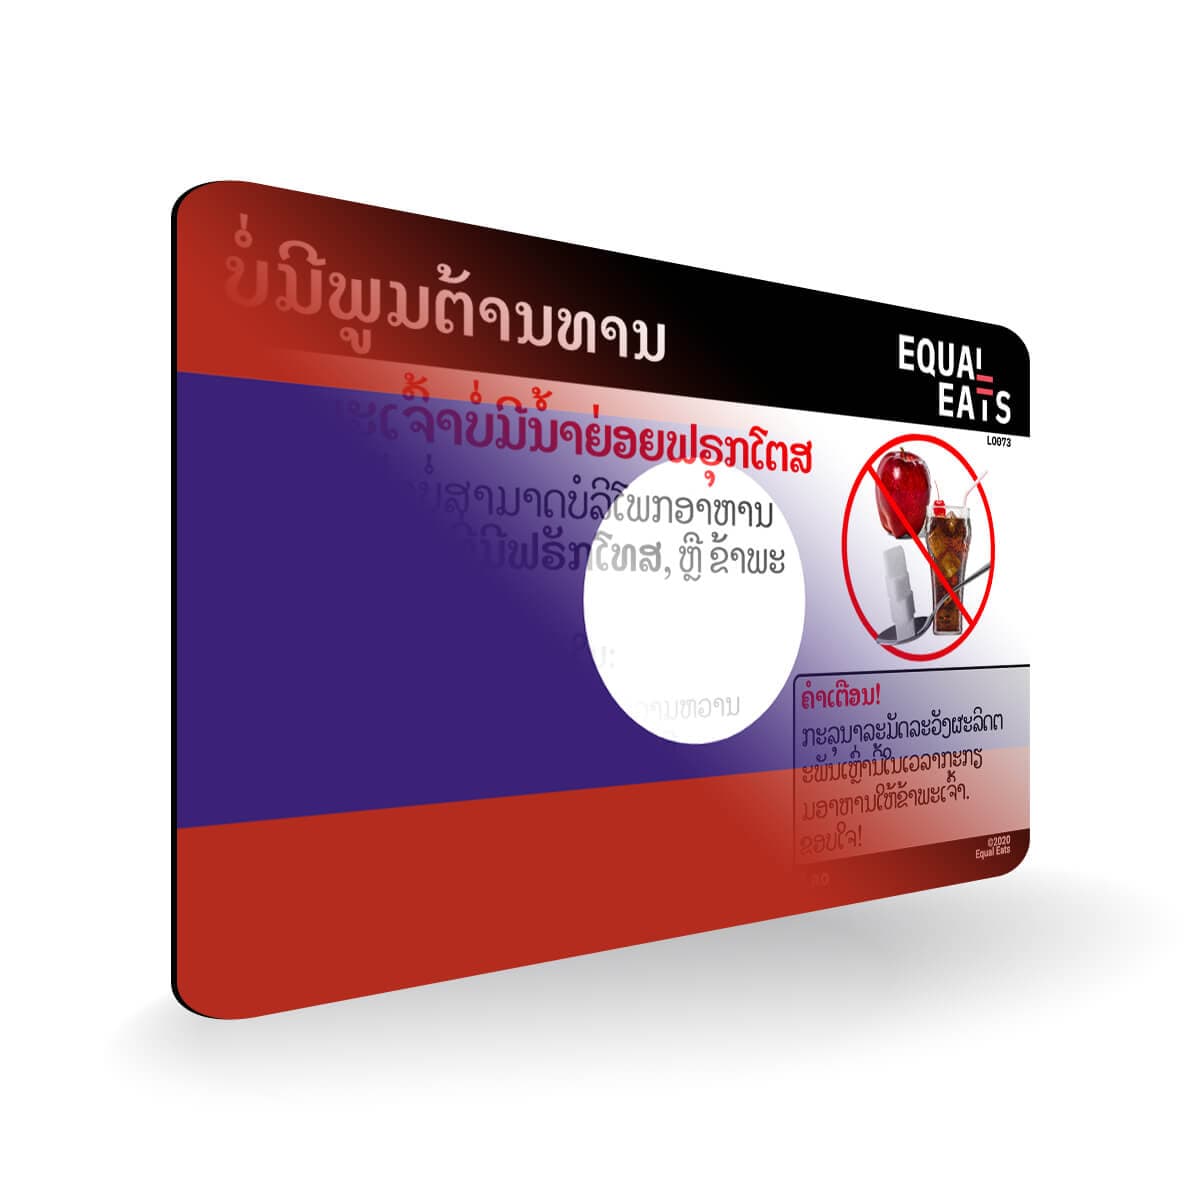 Fructose Intolerance in Lao. Fructose Intolerant Card for Laos